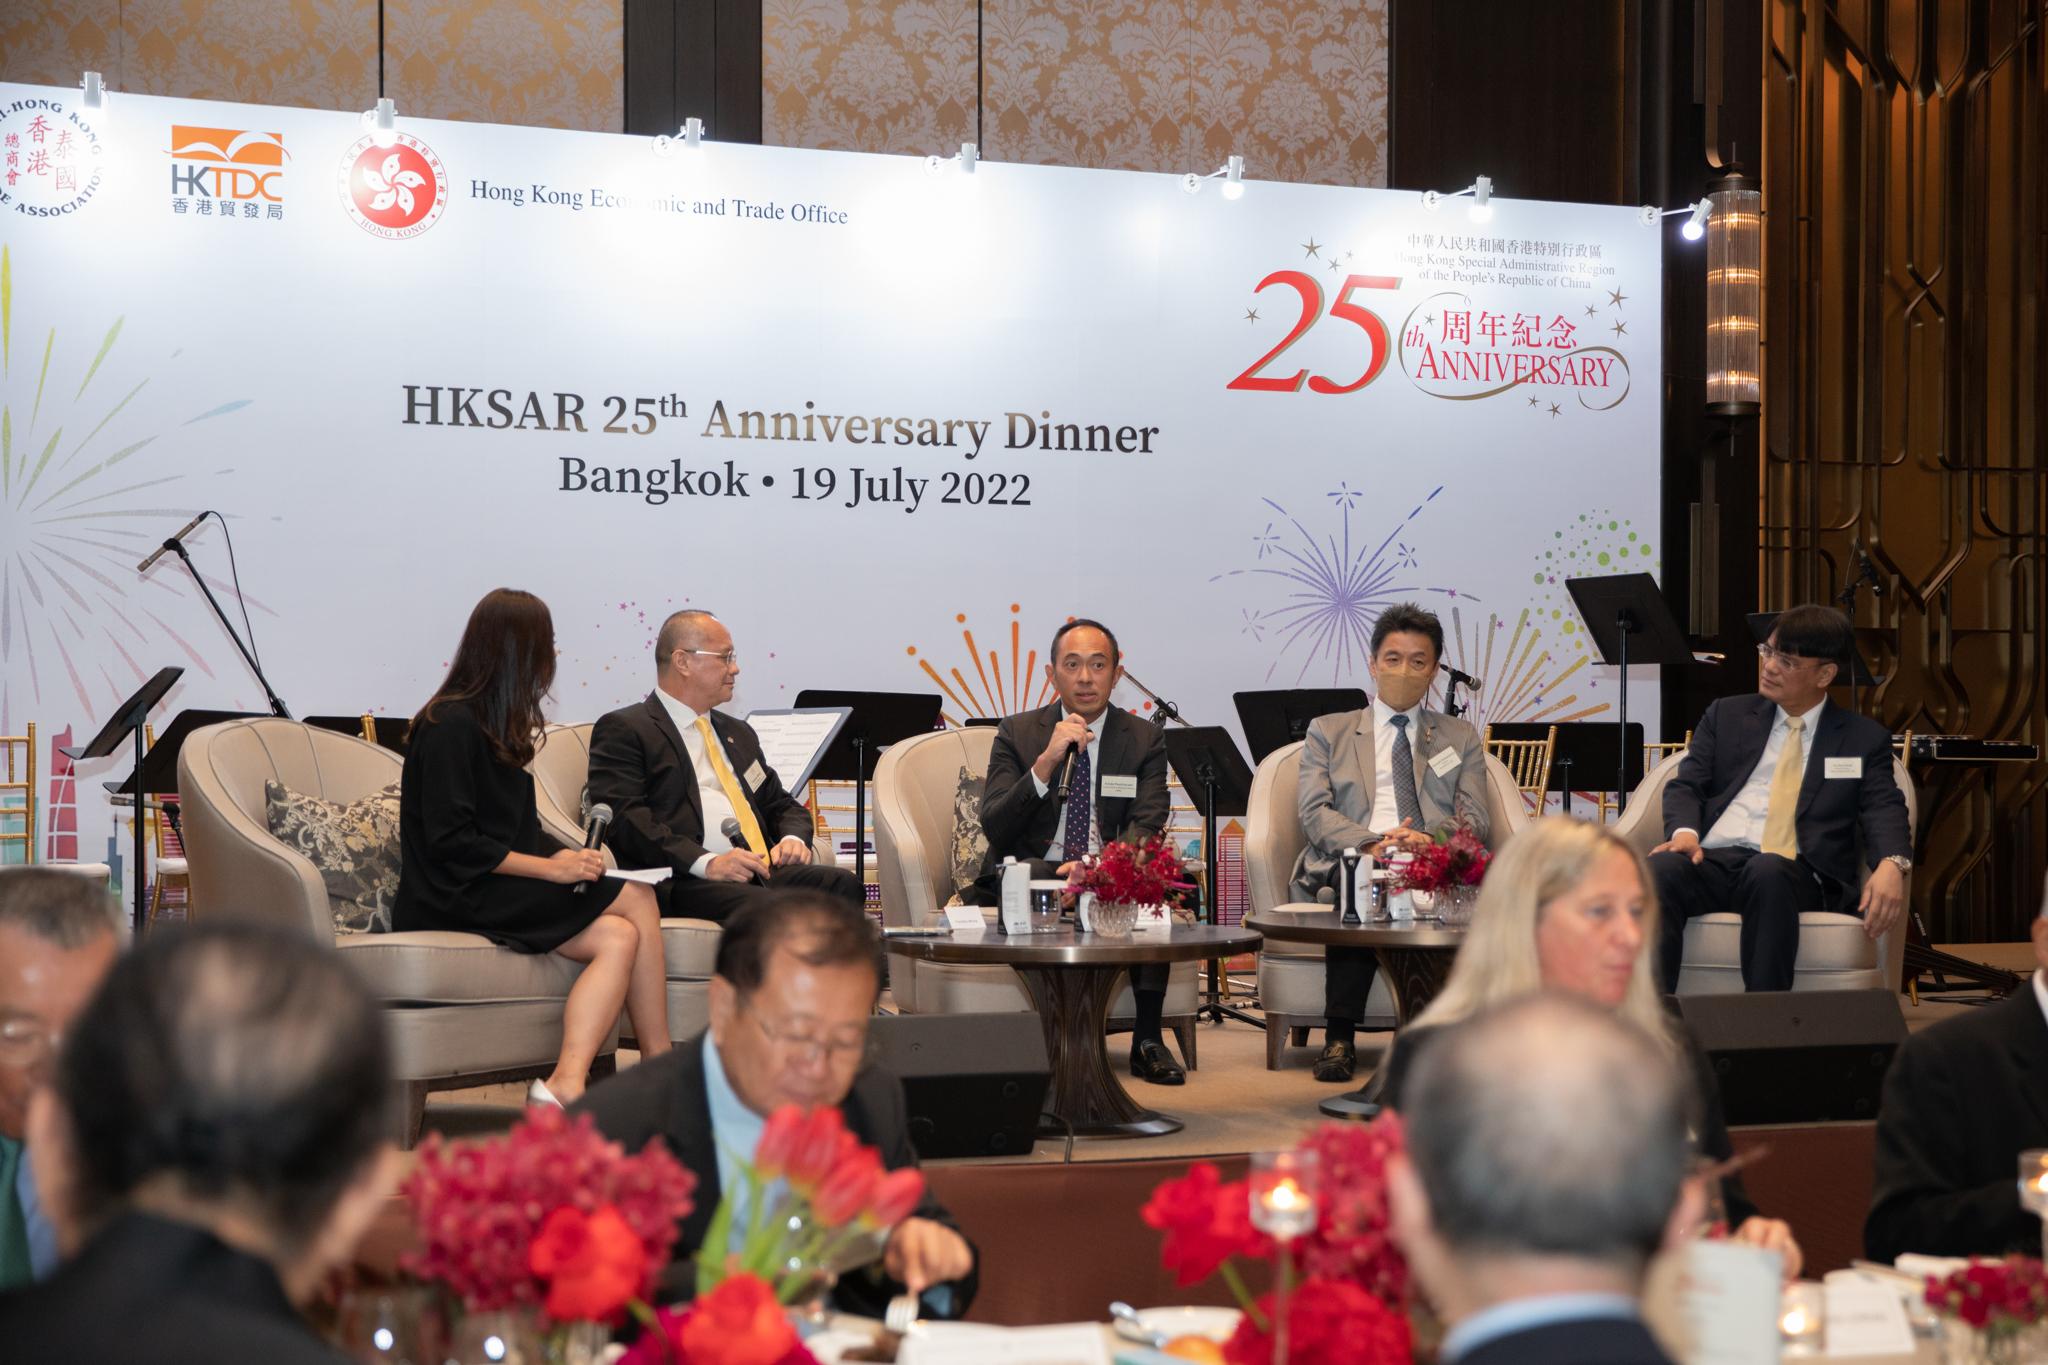 The Hong Kong Economic and Trade Office in Bangkok organised a business dinner in Bangkok on July 19 to celebrate the 25th anniversary of the establishment of the Hong Kong Special Administrative Region including a panel discussion on "25 Years and Beyond - Opportunities in Thailand and Hong Kong". Panel speakers who were prominent local business leaders in Thailand with ties to Hong Kong shared their insights on the business opportunities and potential areas of collaboration between the two places.